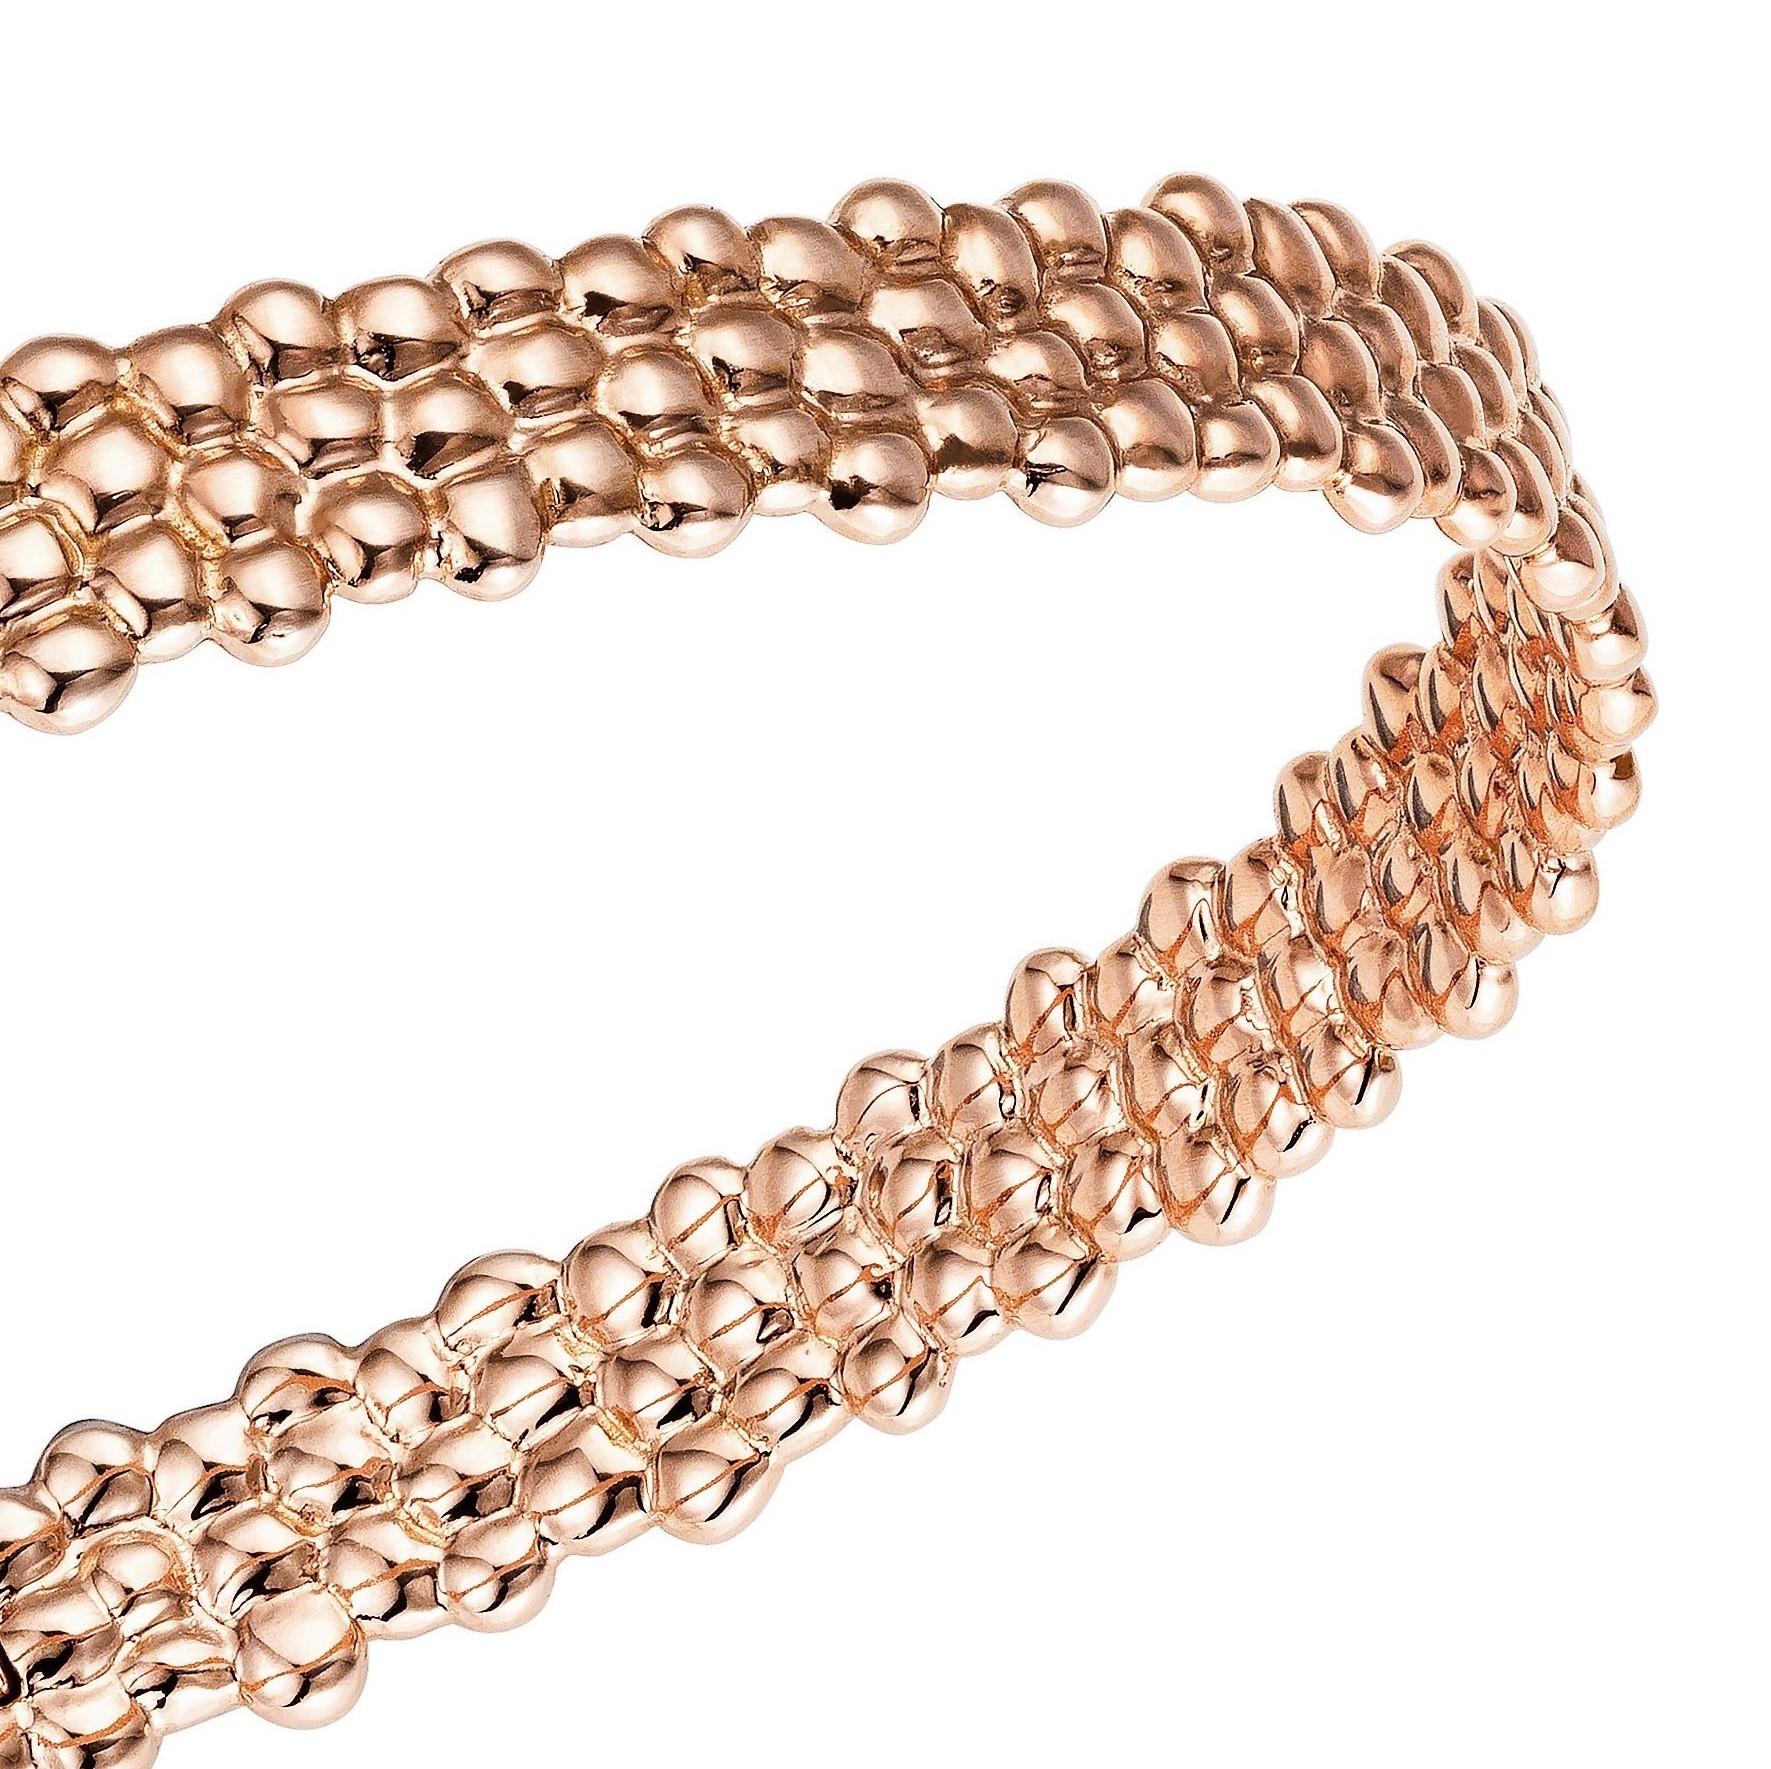 18 Karat Rose Gold Bangle Bracelet

This beautiful rose gold bangle is part of the Skinny collection. The average gold weight 16 grams. This is a perfect piece for those looking to add something versatile yet attention-grabbing to their jewellery